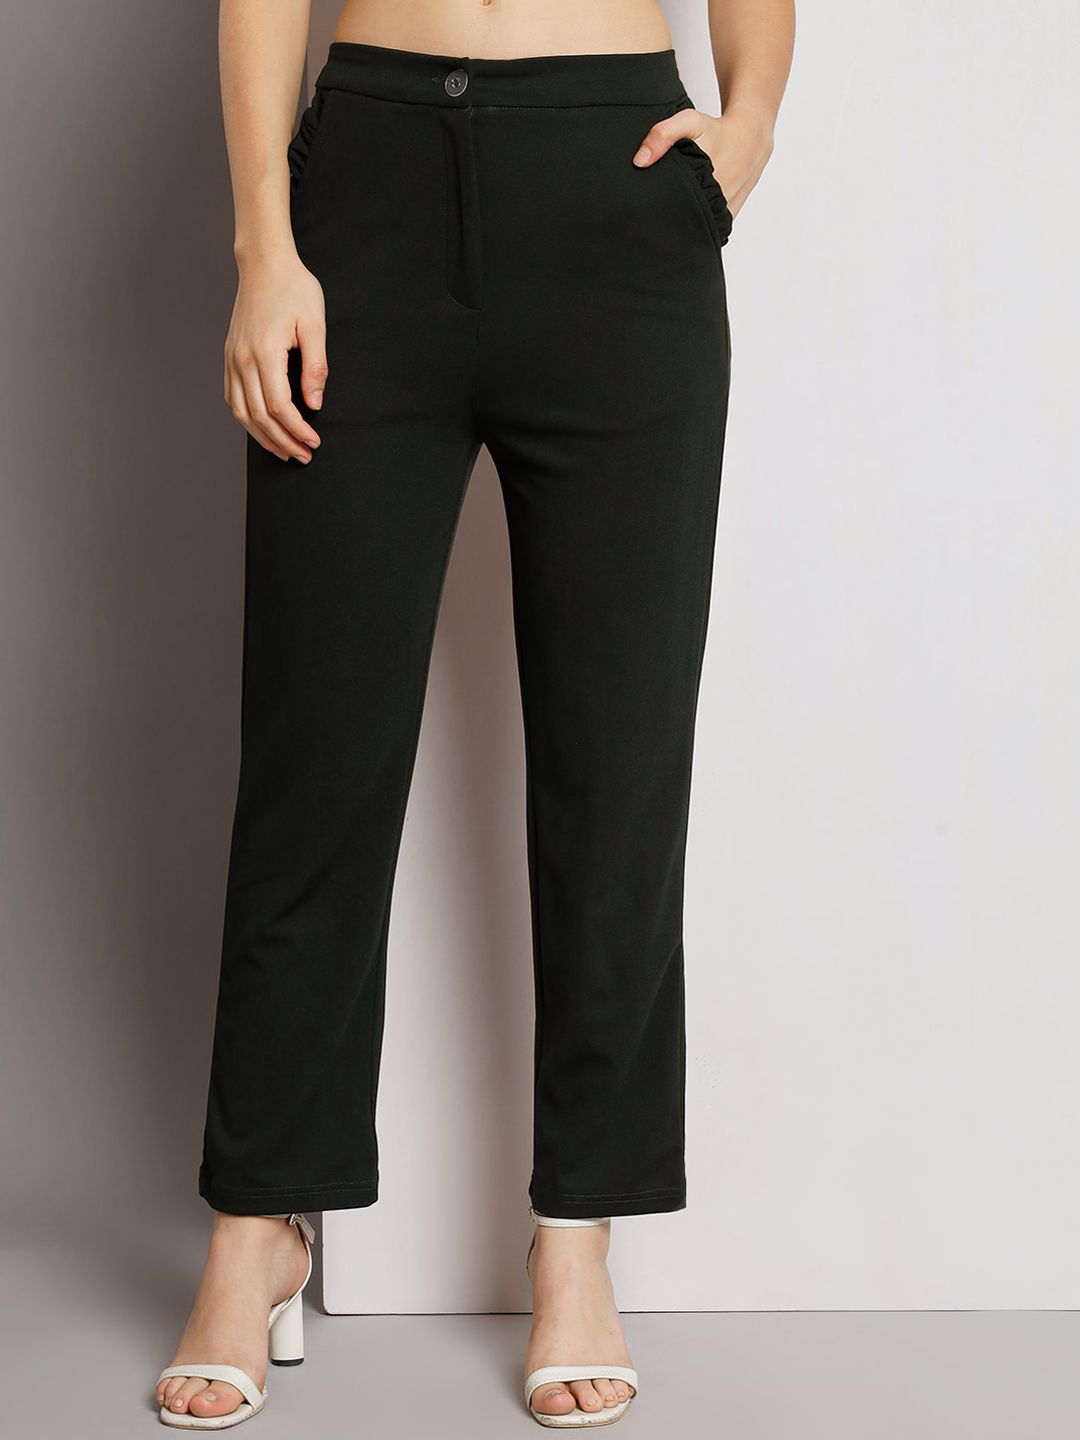 Q-rious Women Flat-Front Mid-Rise Trousers Price in India